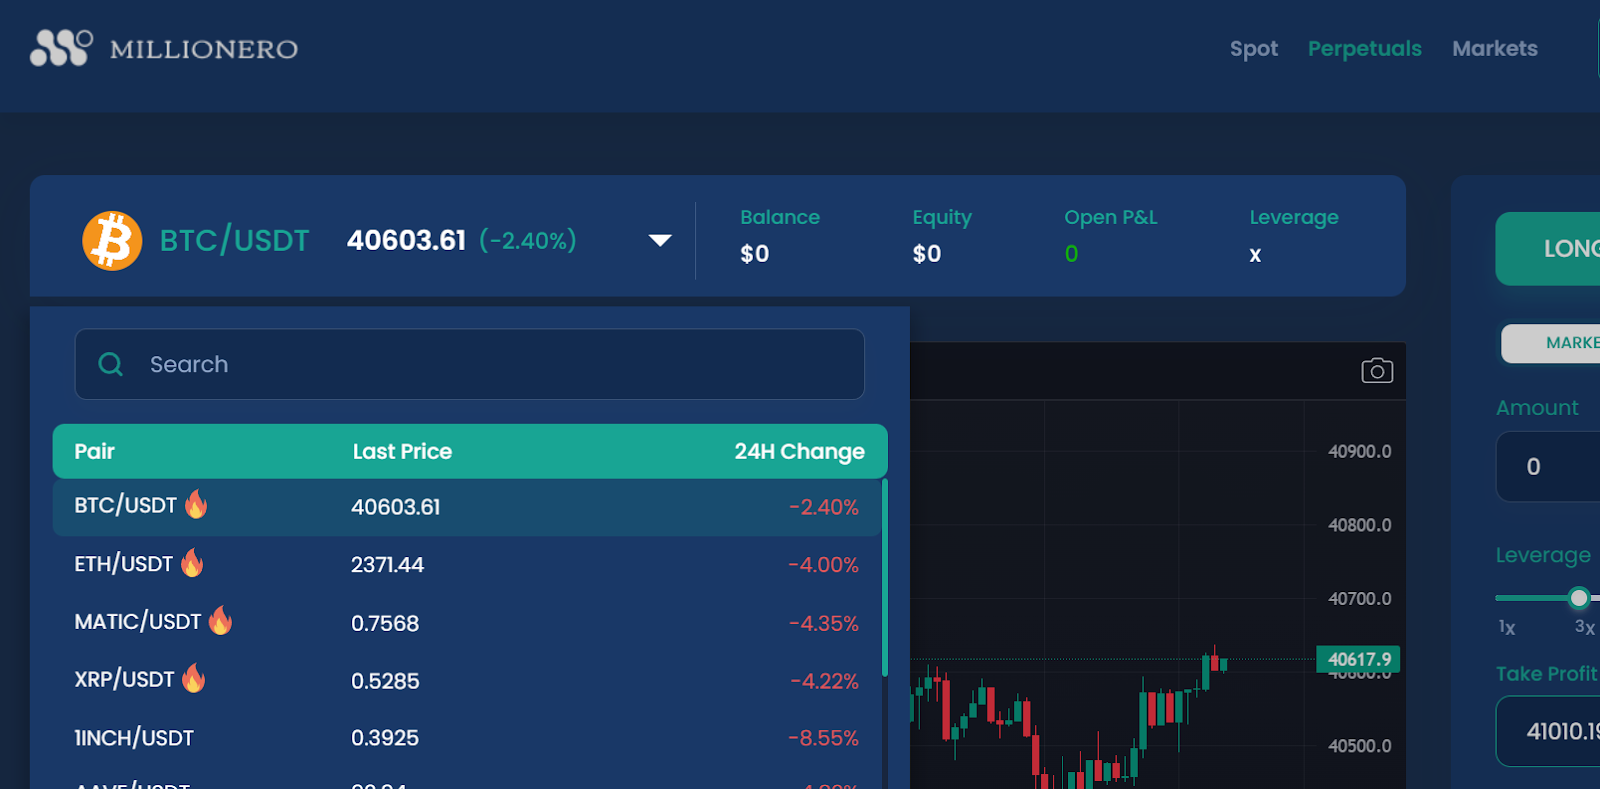 Crypto pairs with USDT as quote currency in the Millionero Perpetuals market